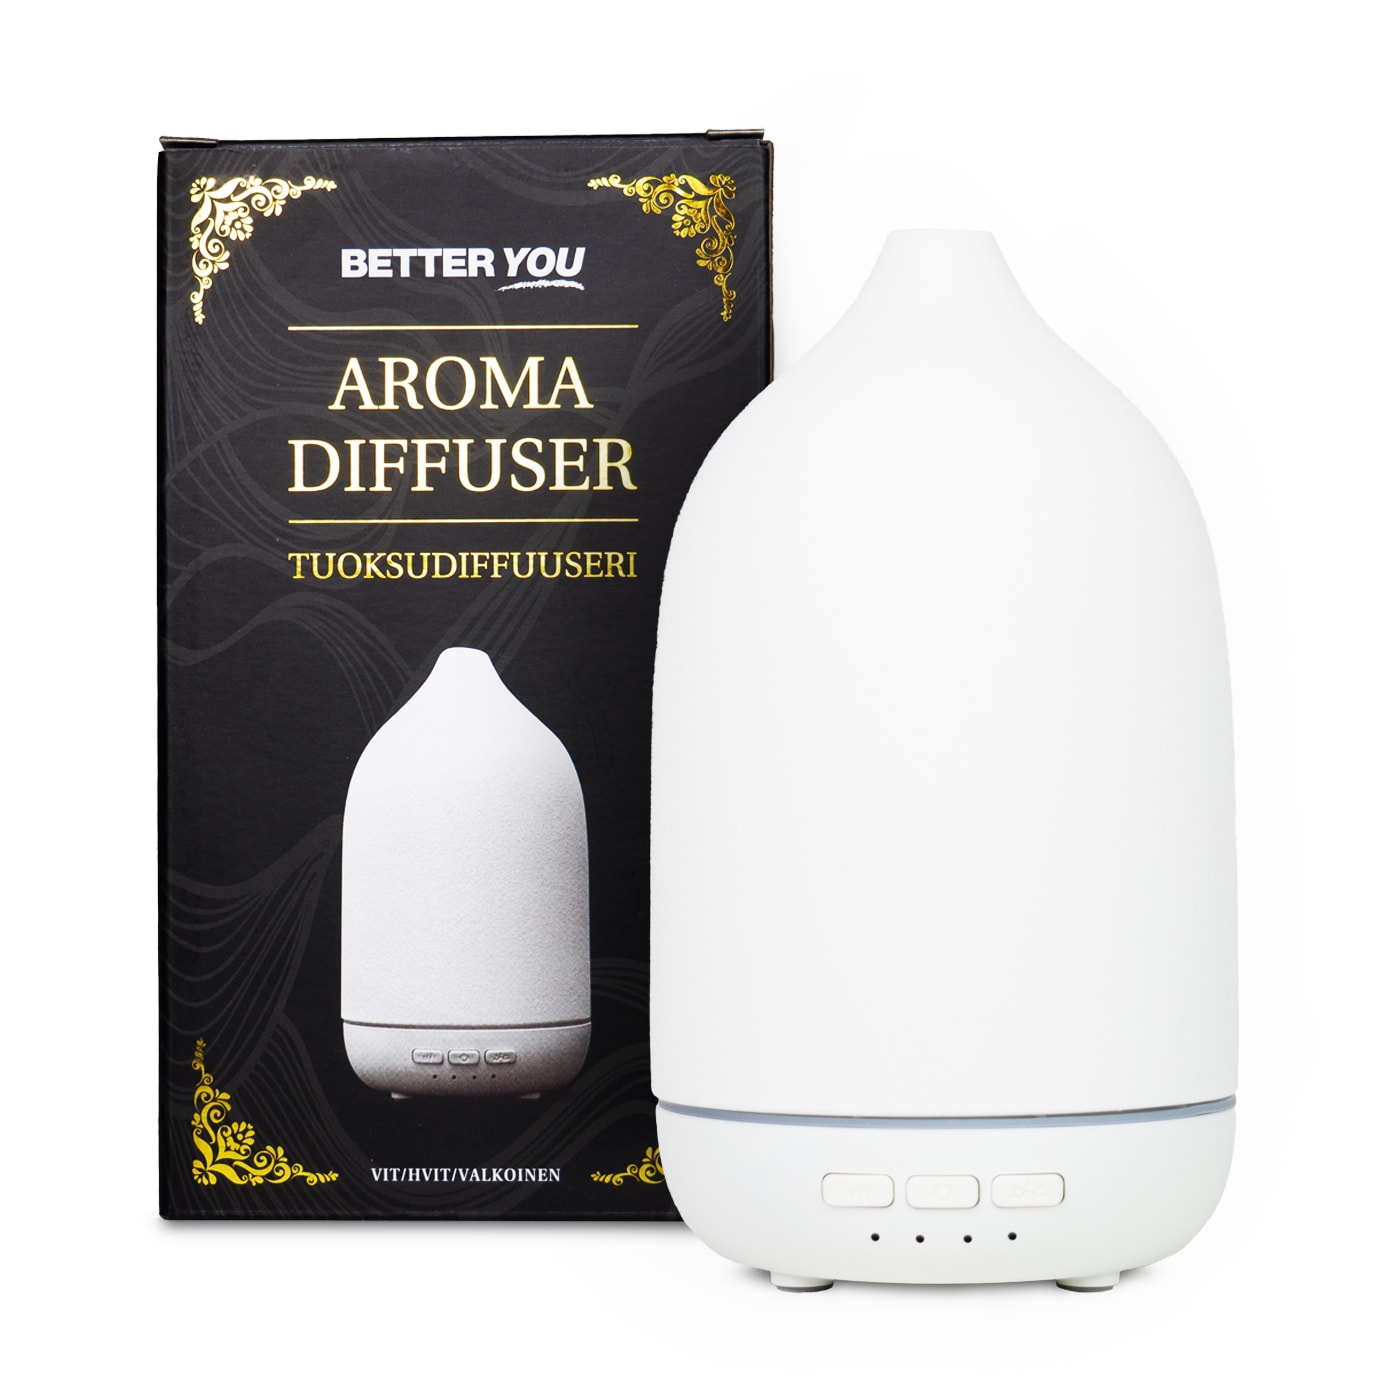 Better You Aroma diffuser lampa